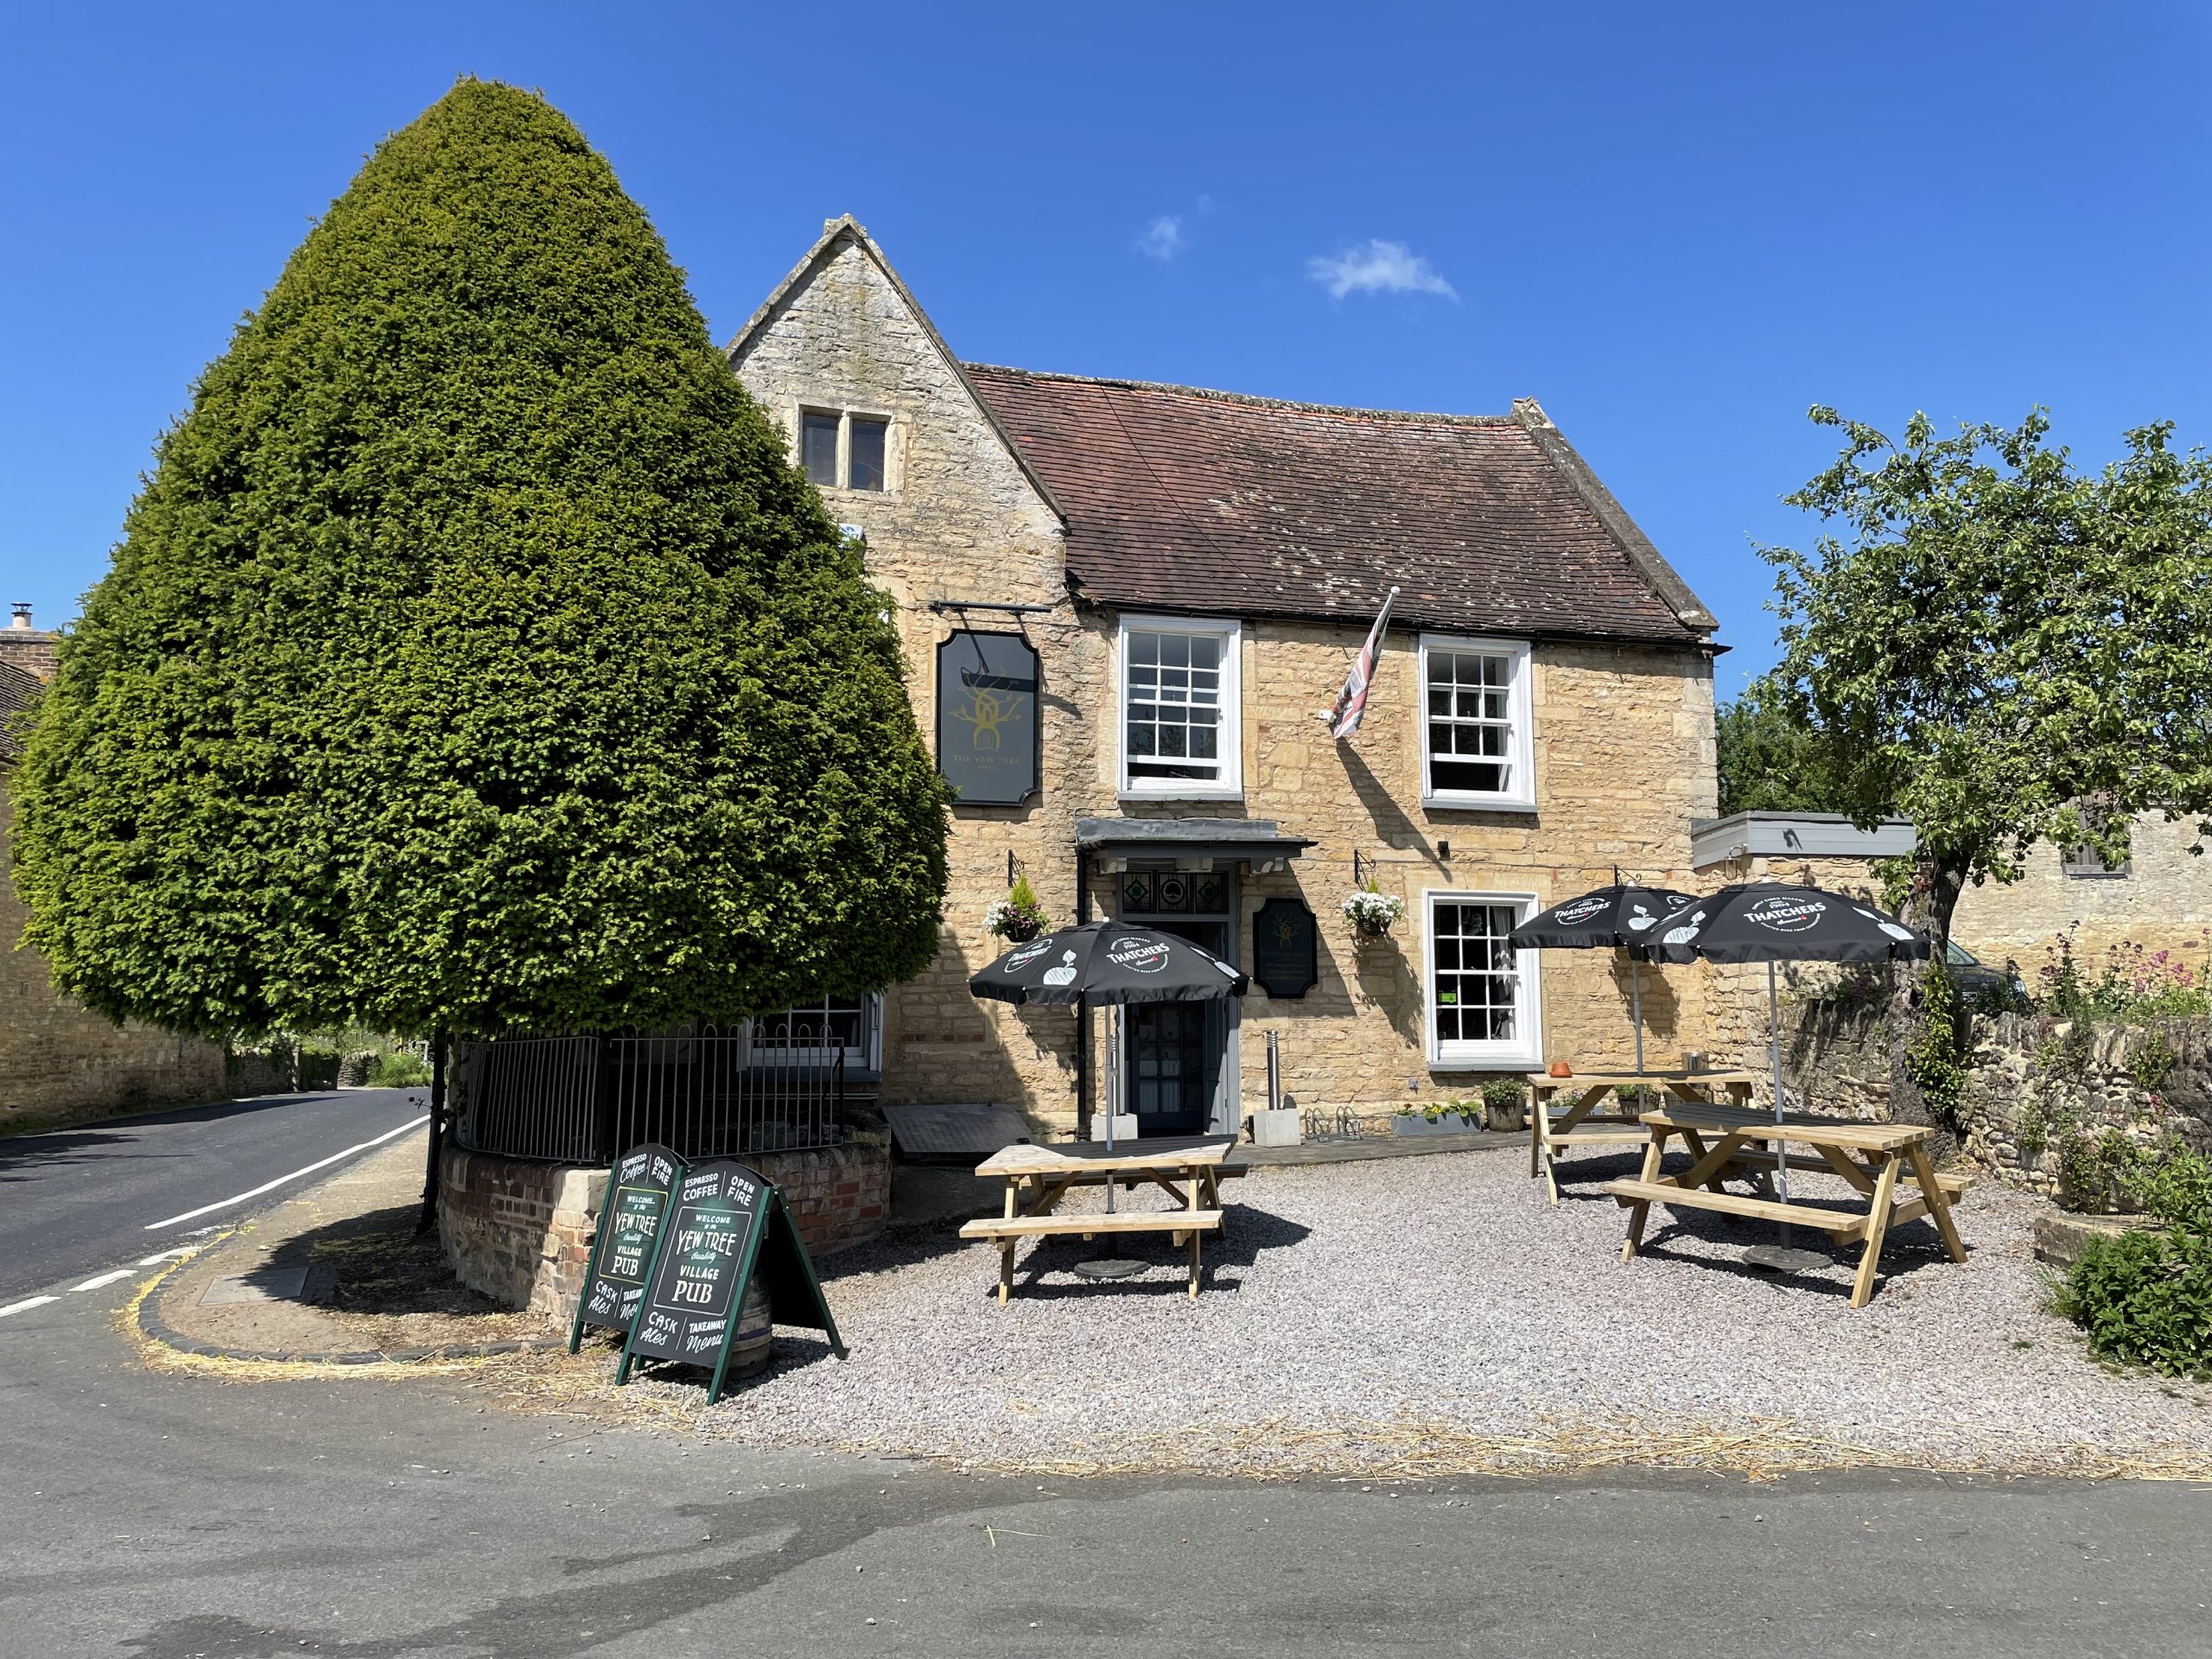 Cotswold country pub located in Conderton, Gloucestershire